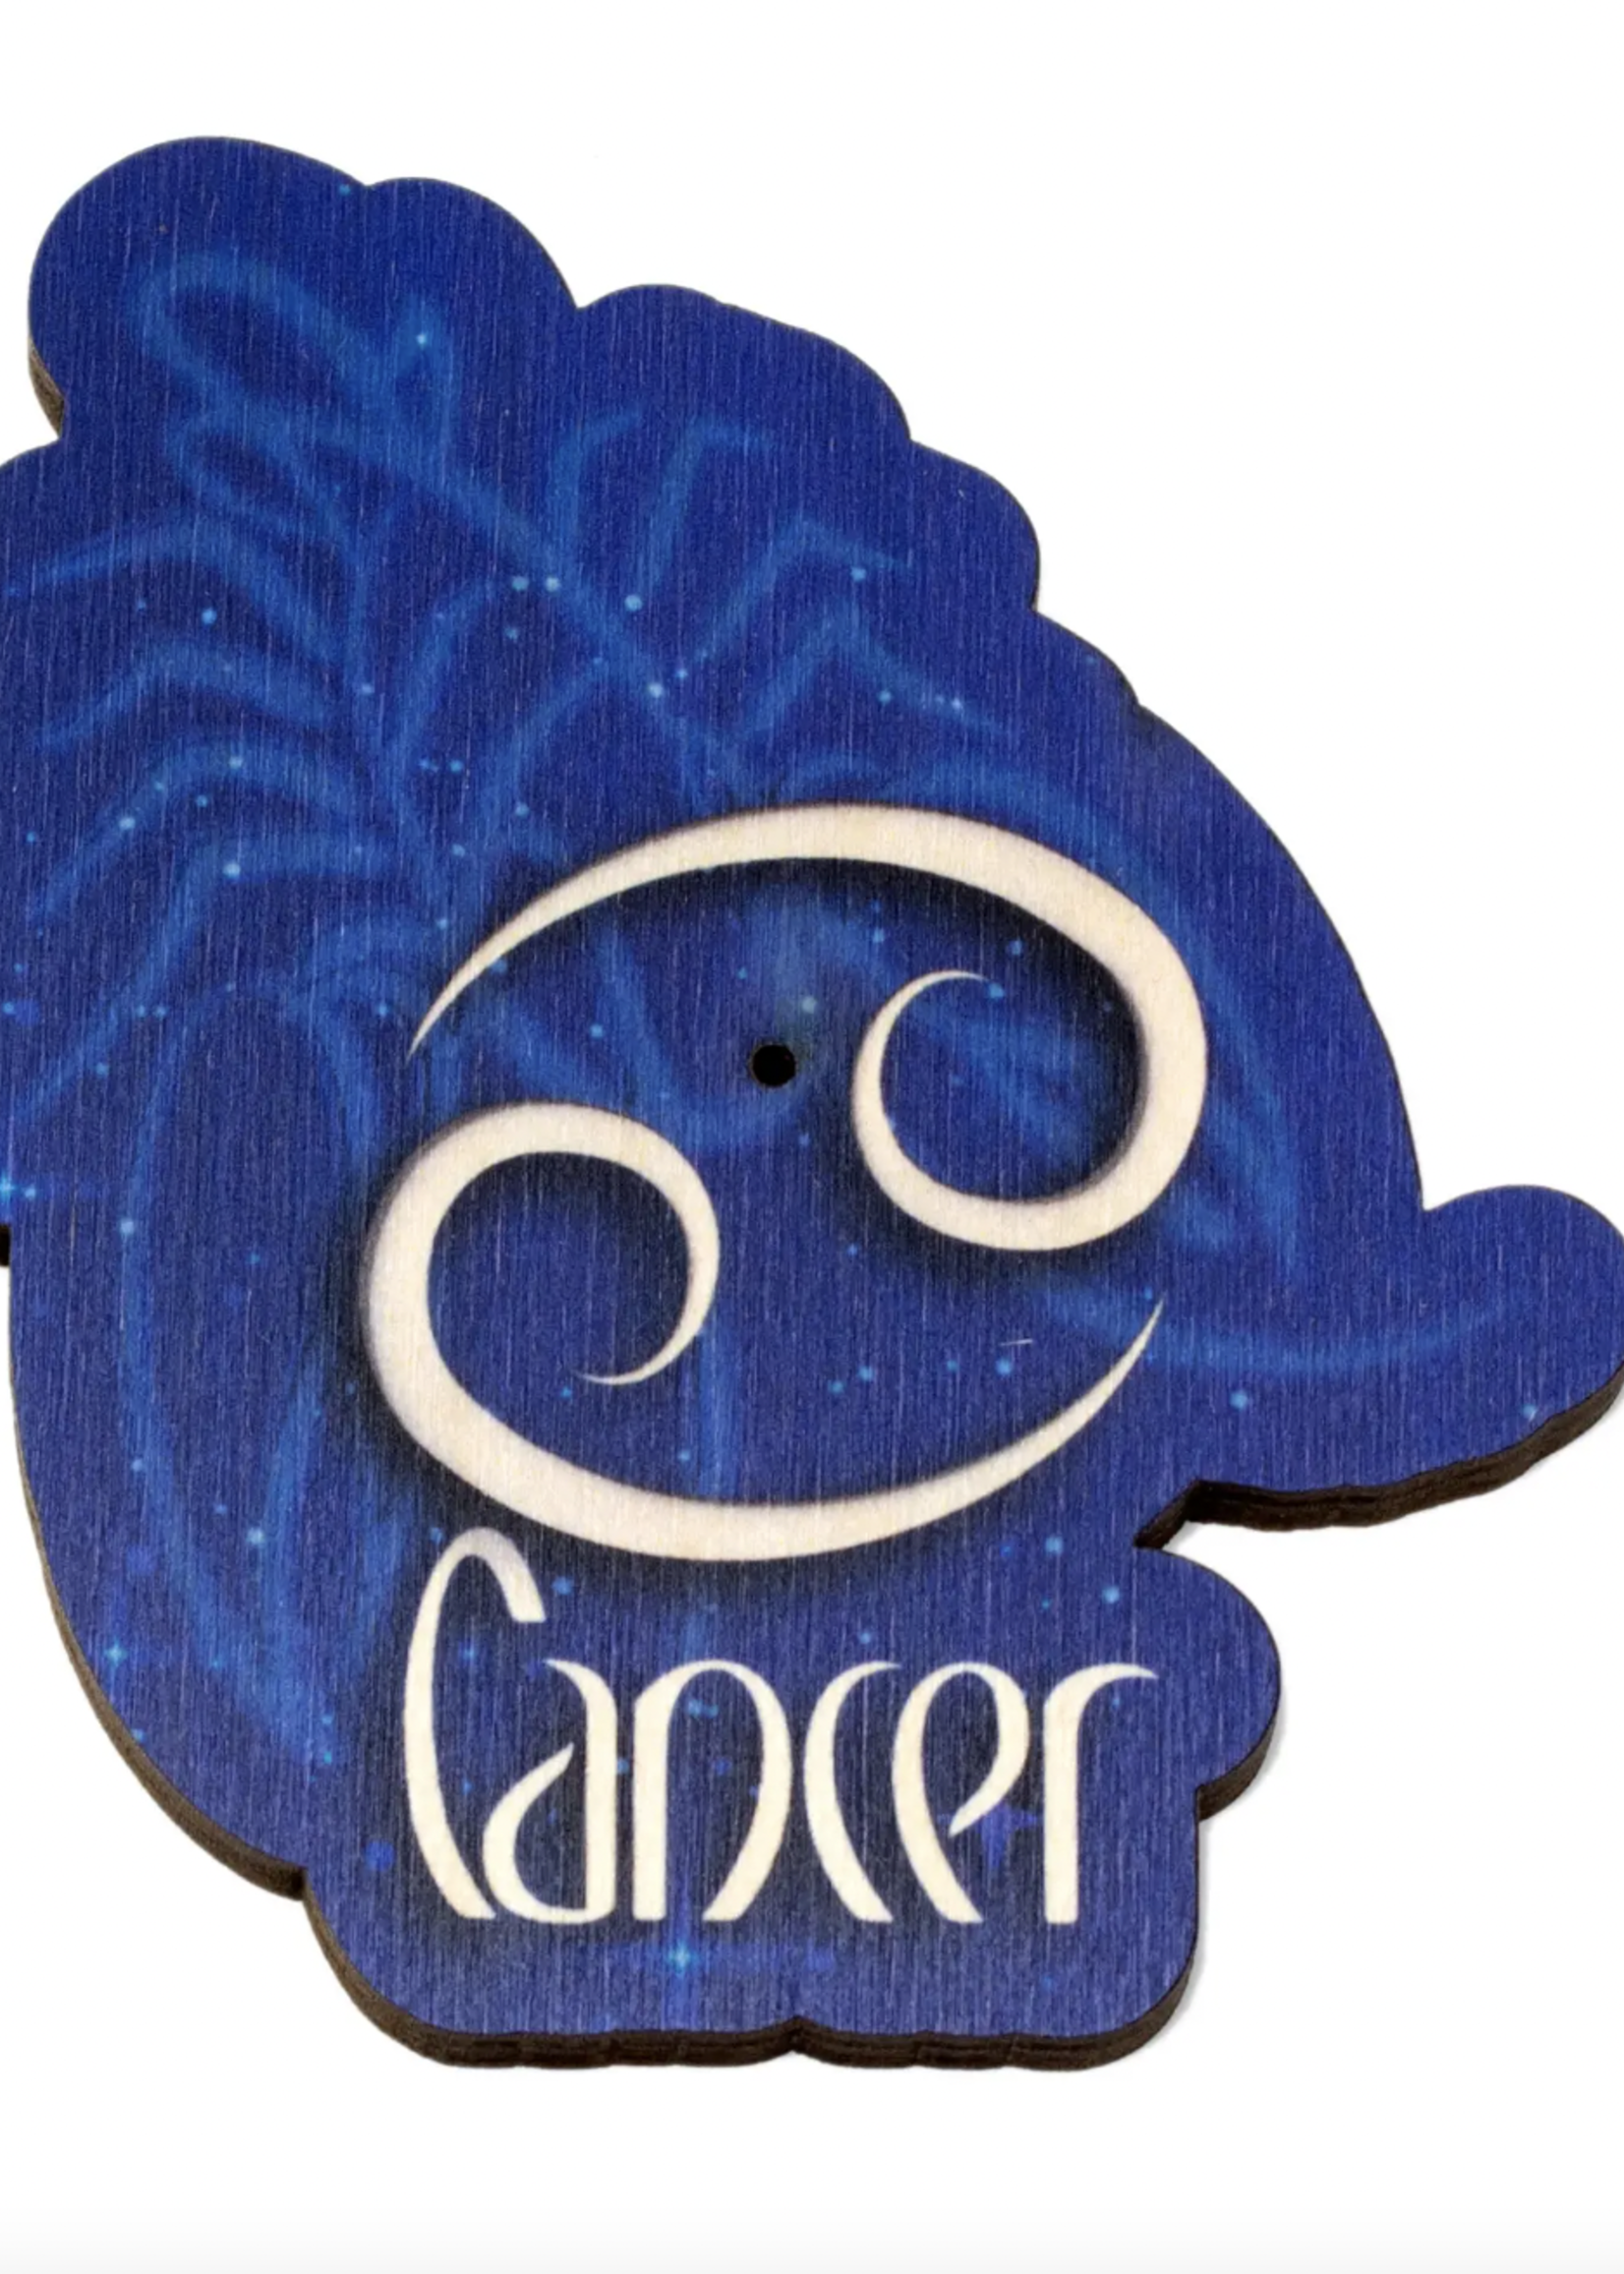 Most Amazing Cancer Wooden Keychain